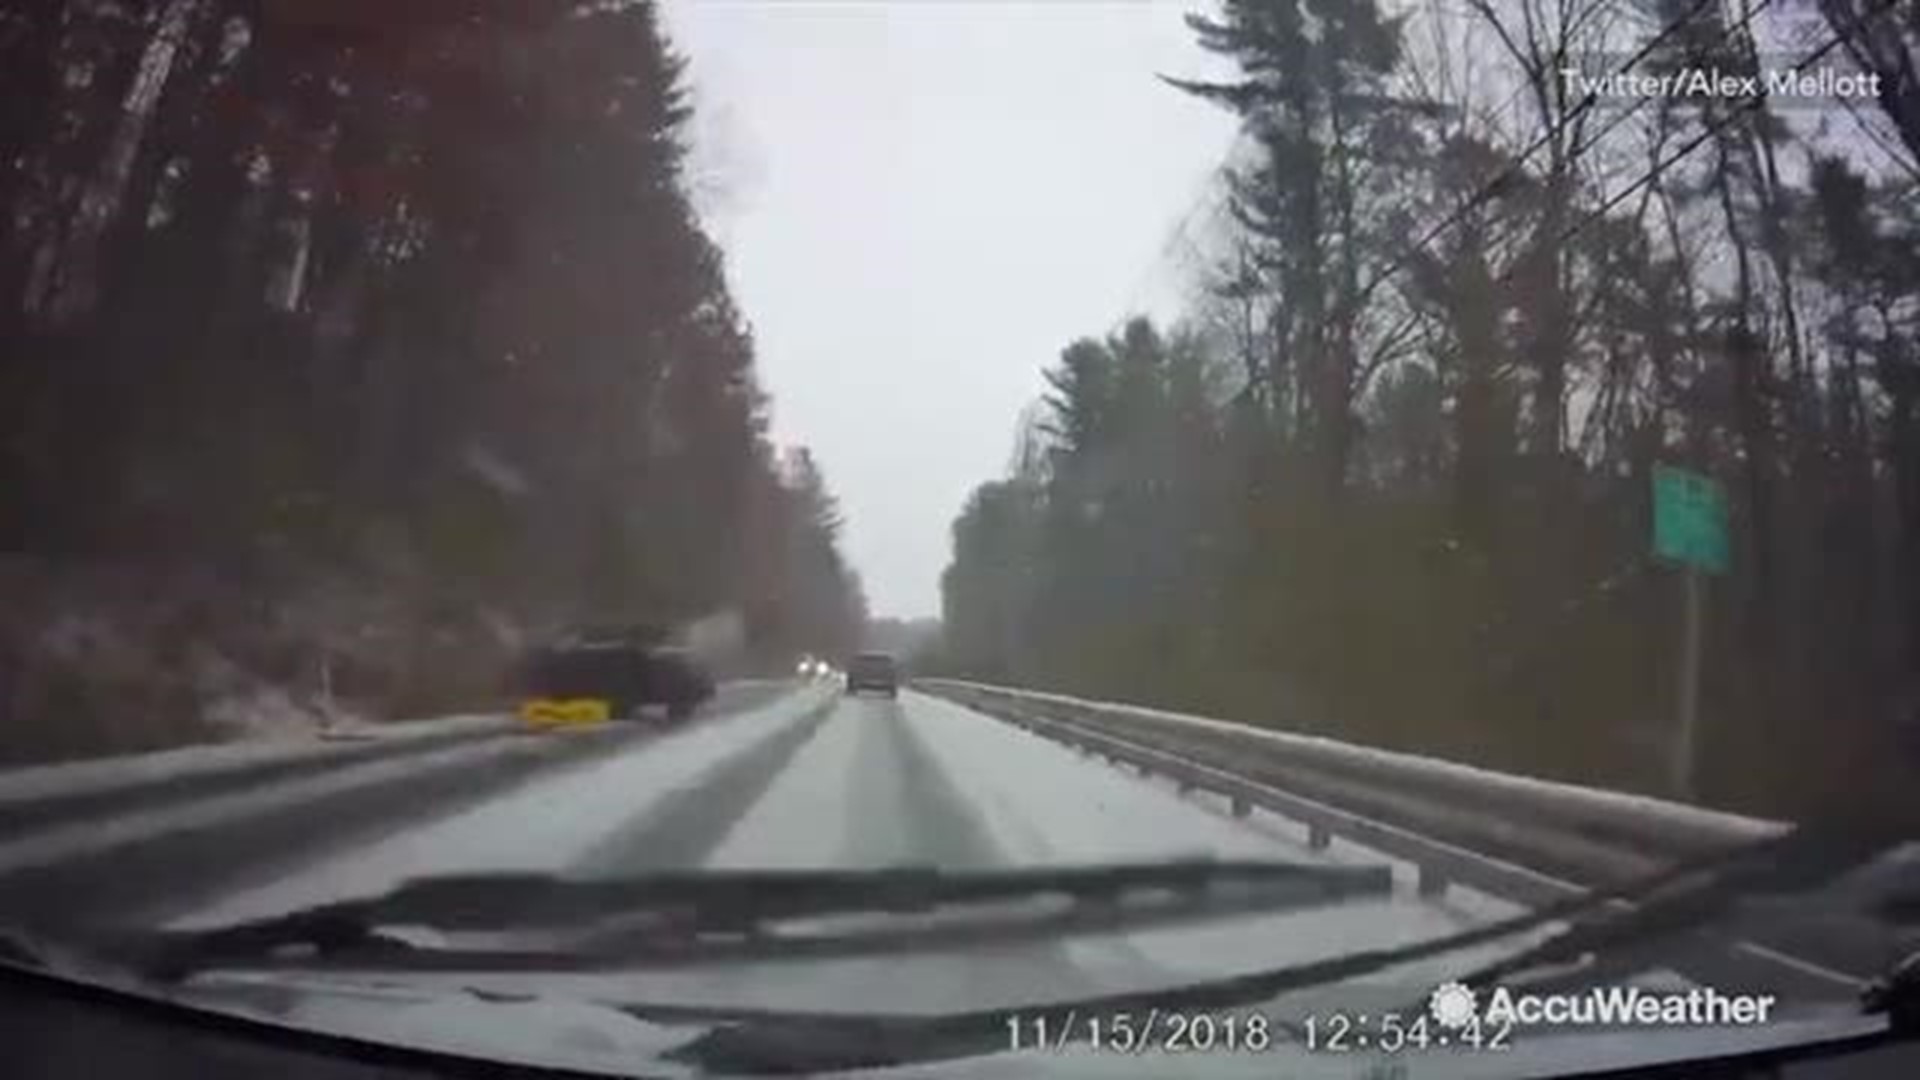 This car in State College, Pennsylvania was spotted rolling over due to the slippery road conditions from the winter storm.  The driver of the vehicle is reported to be okay.